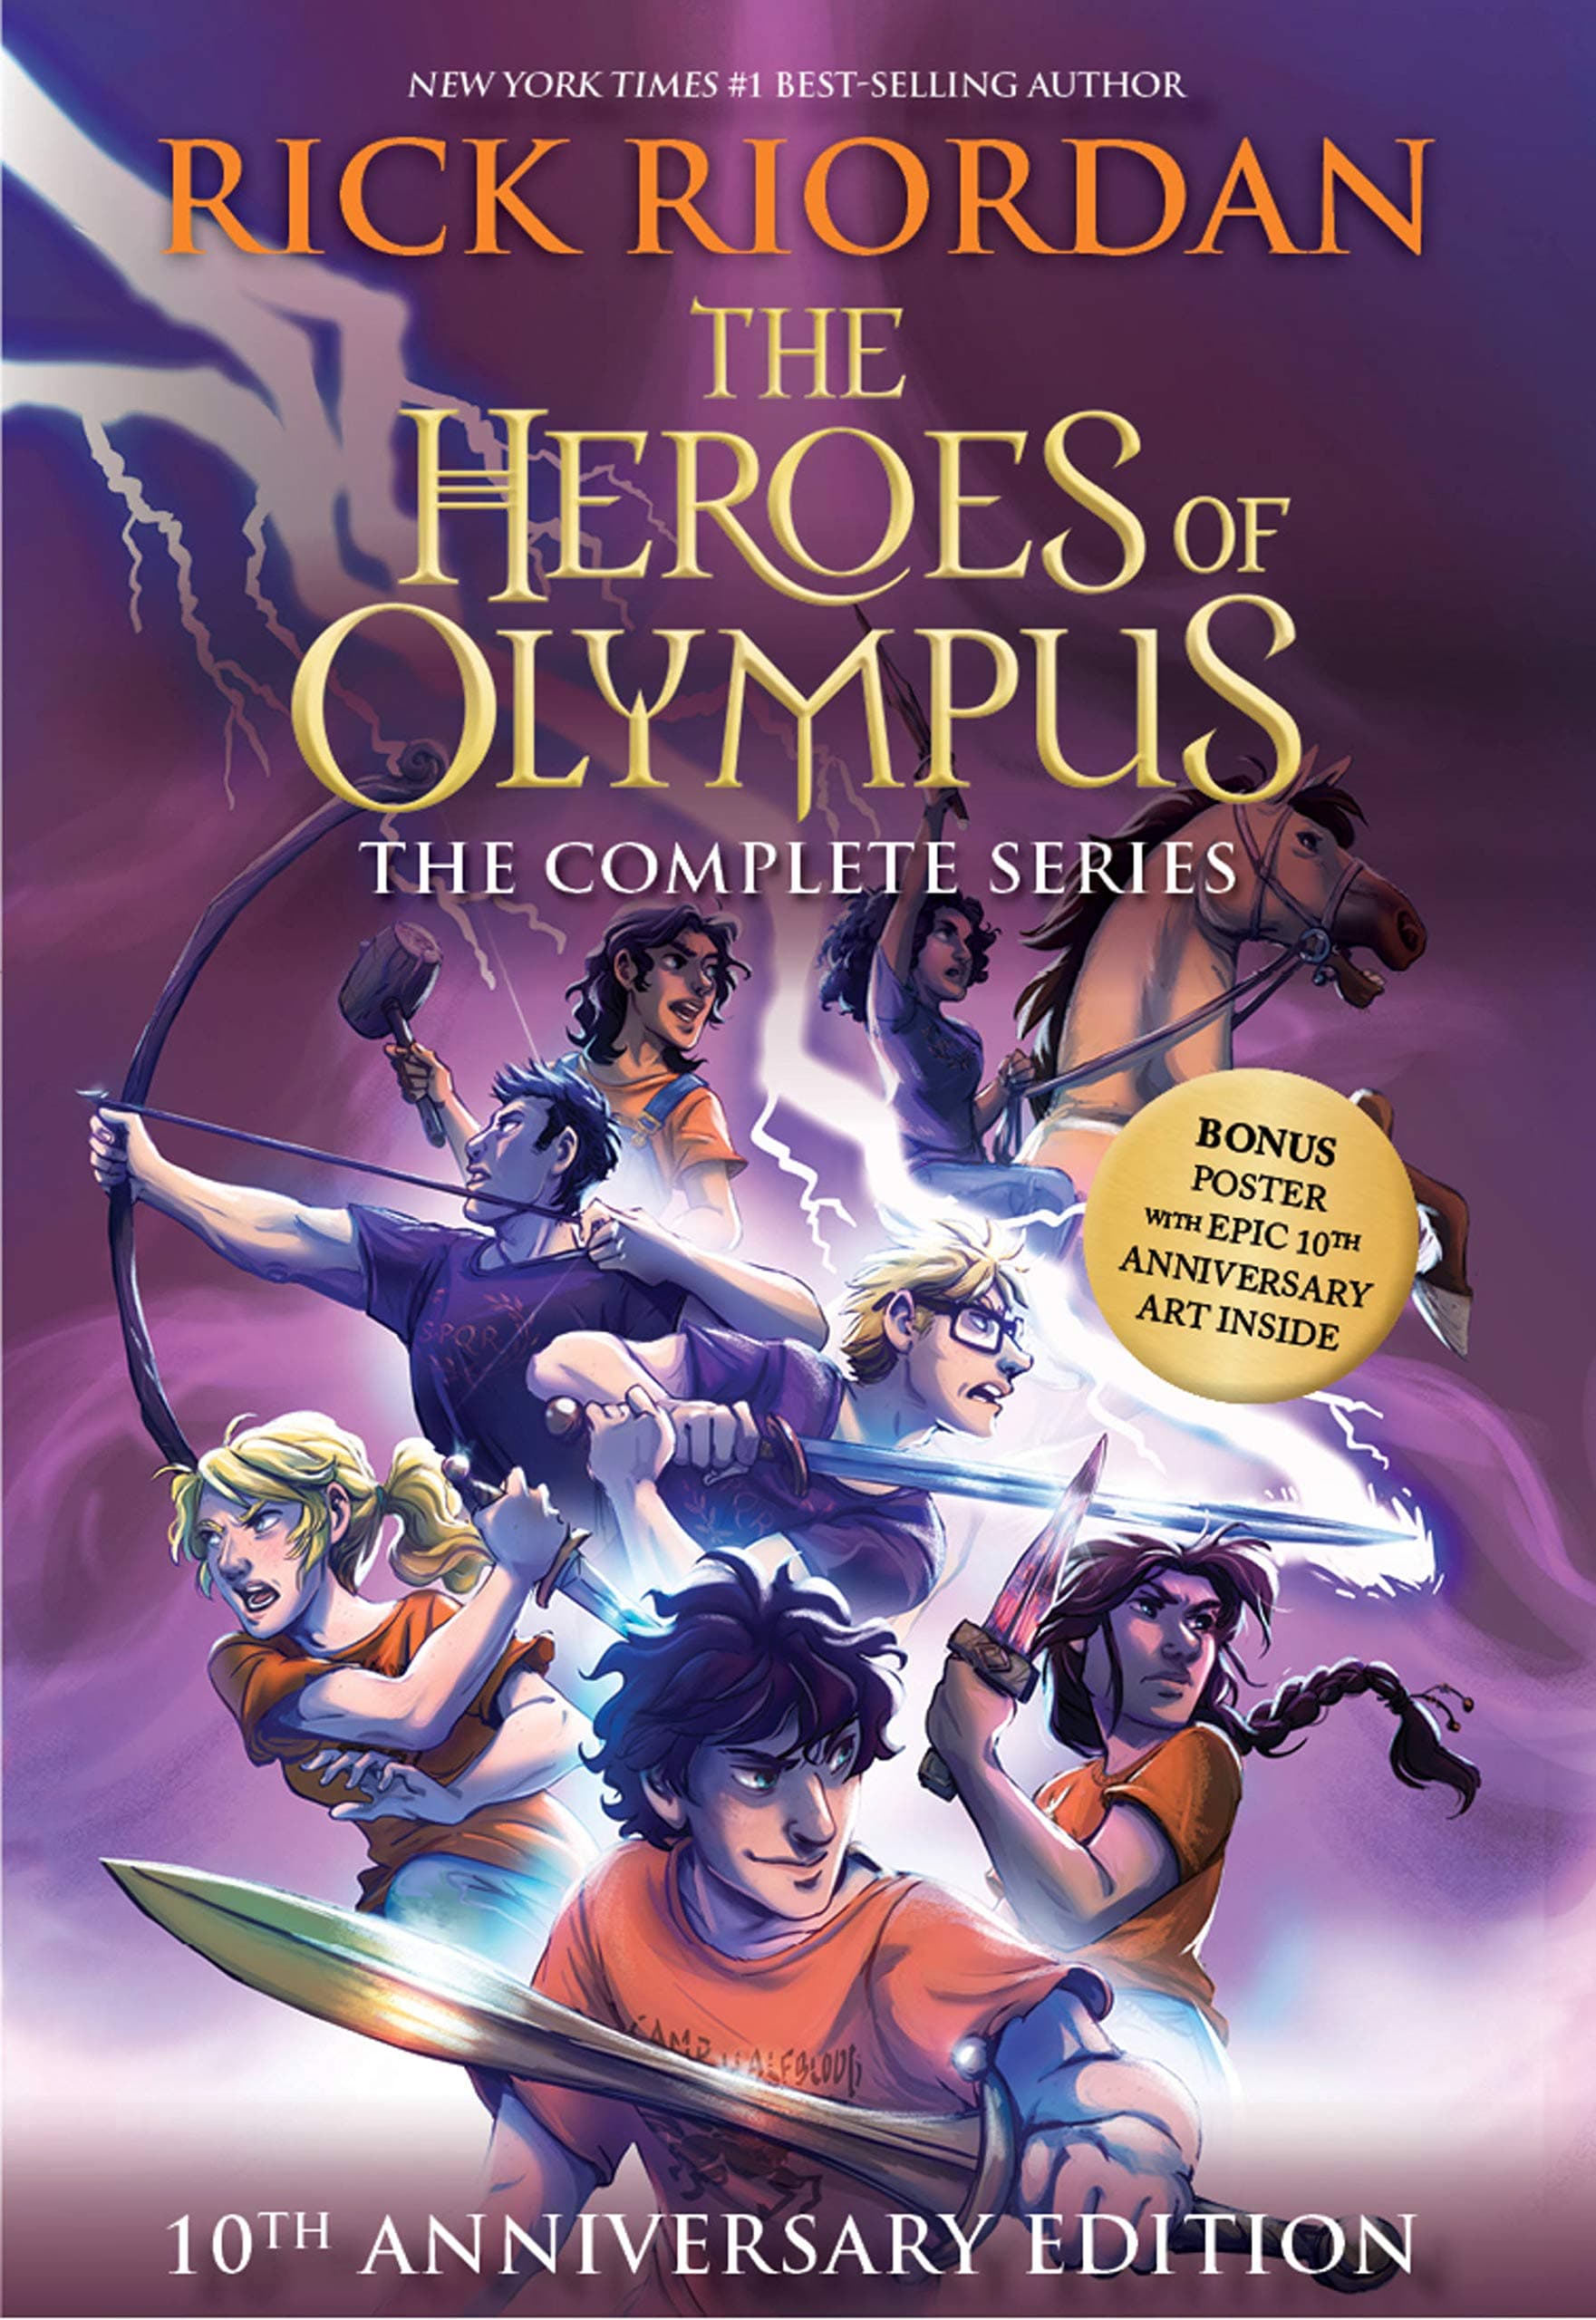 The Heroes of Olympus Paperback Boxed Set (10th Anniversary Edition) [Book]